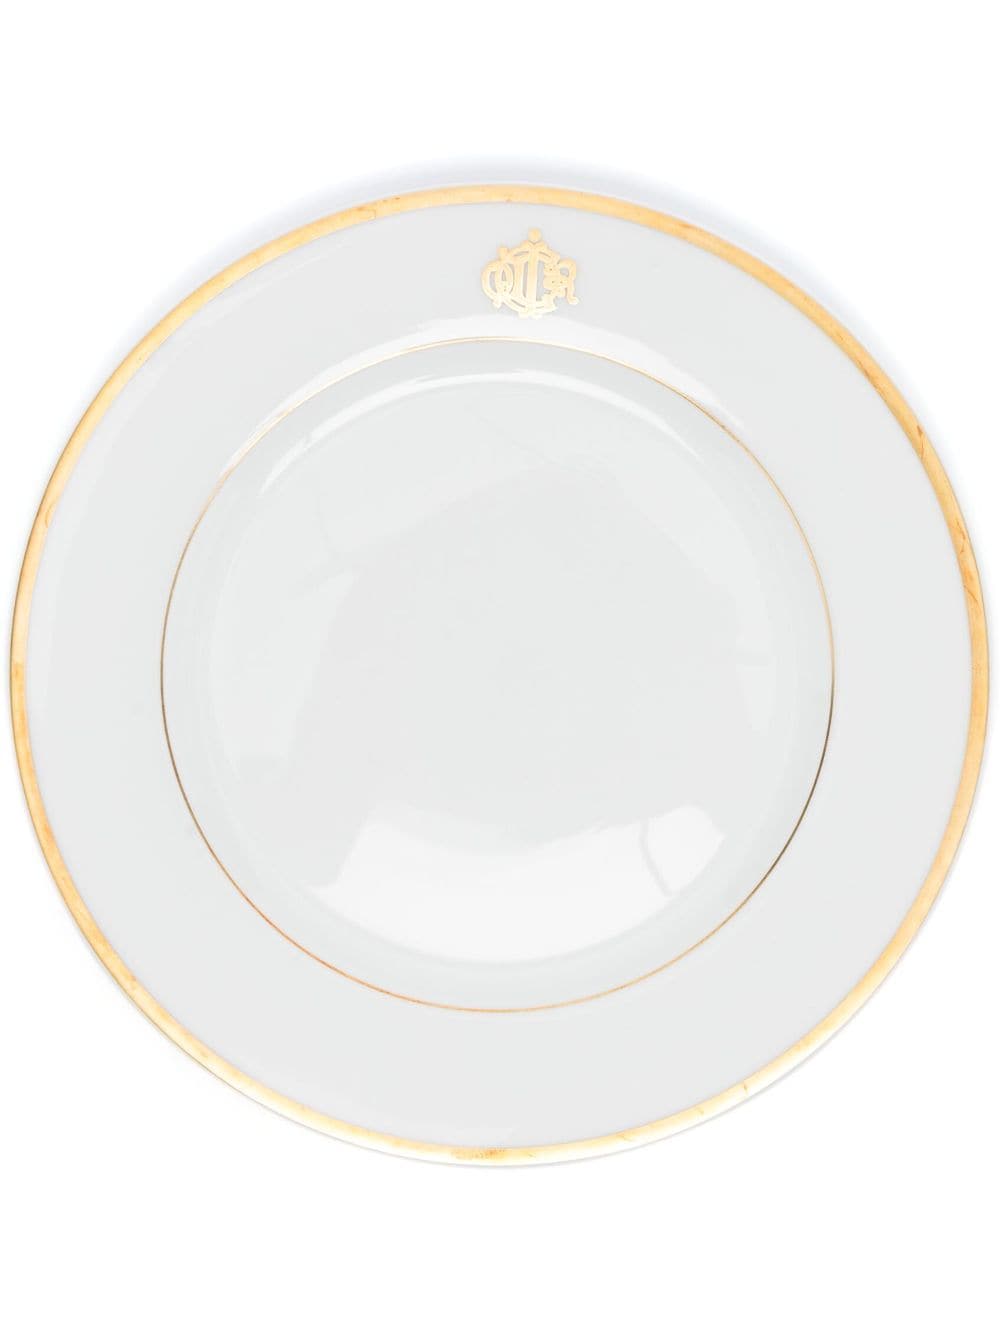 Christian Dior Pre-Owned logo-stamped porcelain dessert plate - White von Christian Dior Pre-Owned